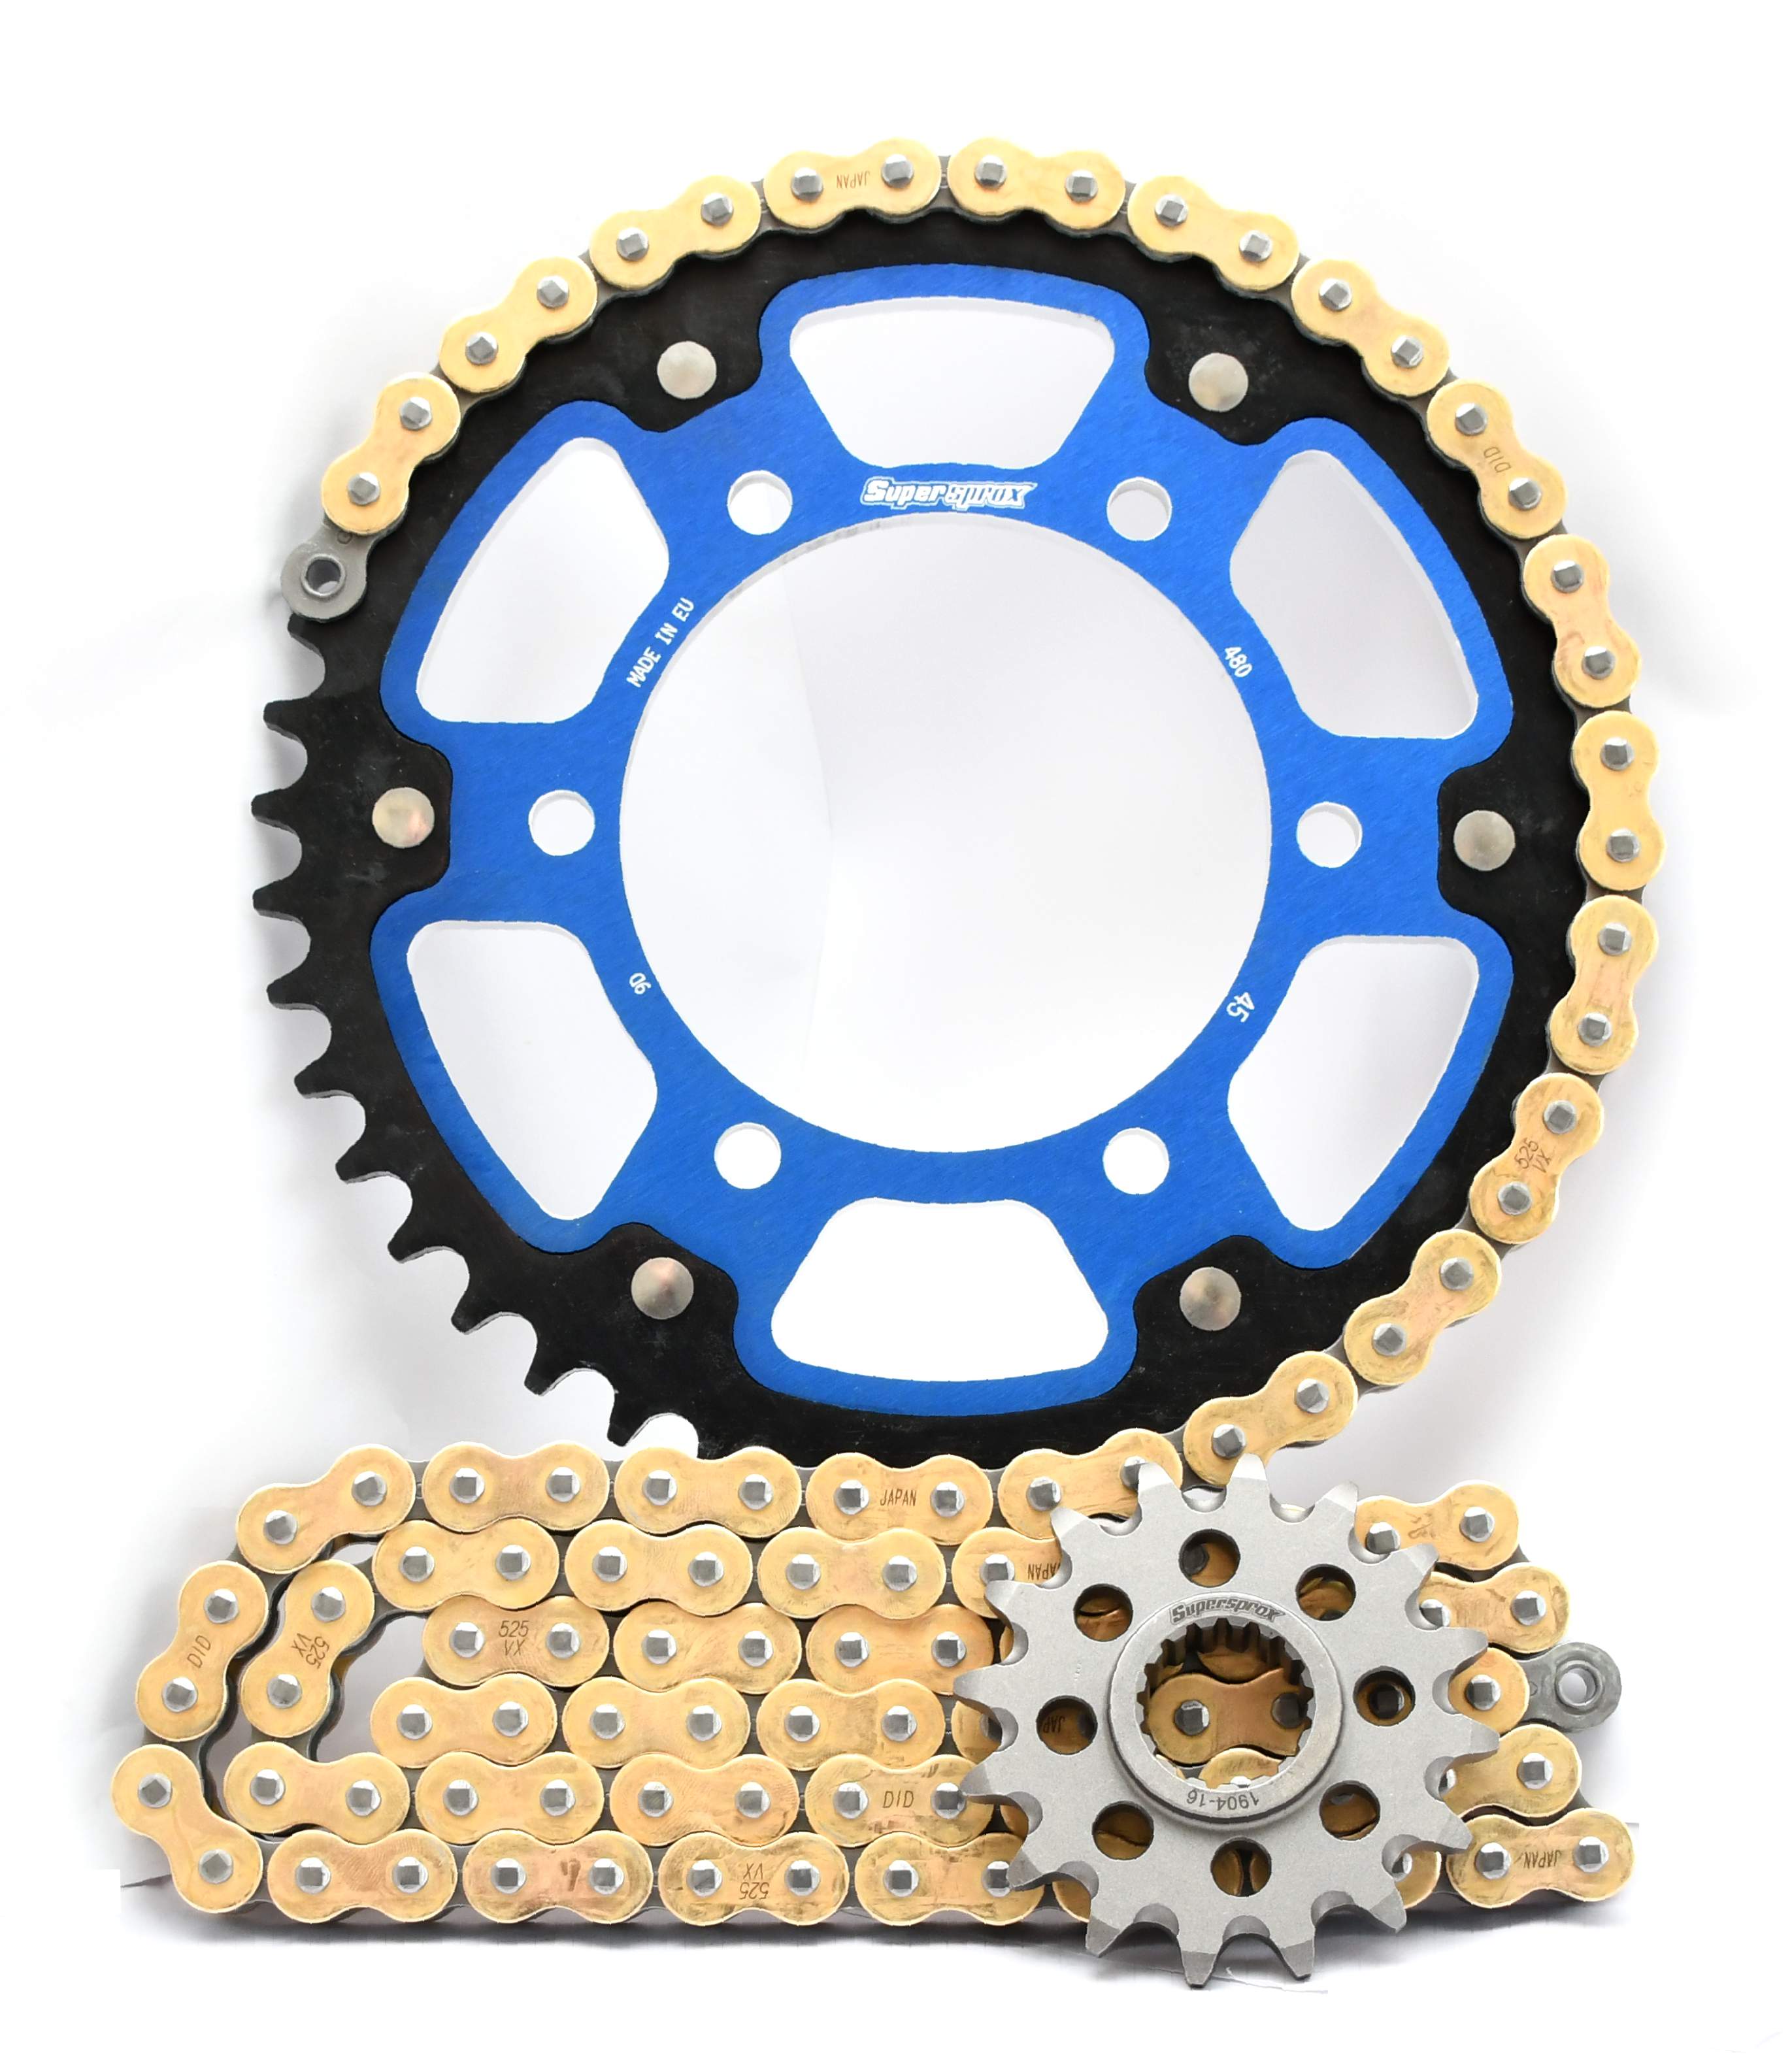 Supersprox Chain & Sprocket Kit for Yamaha MT-10 - Choose Your Gearing - 0